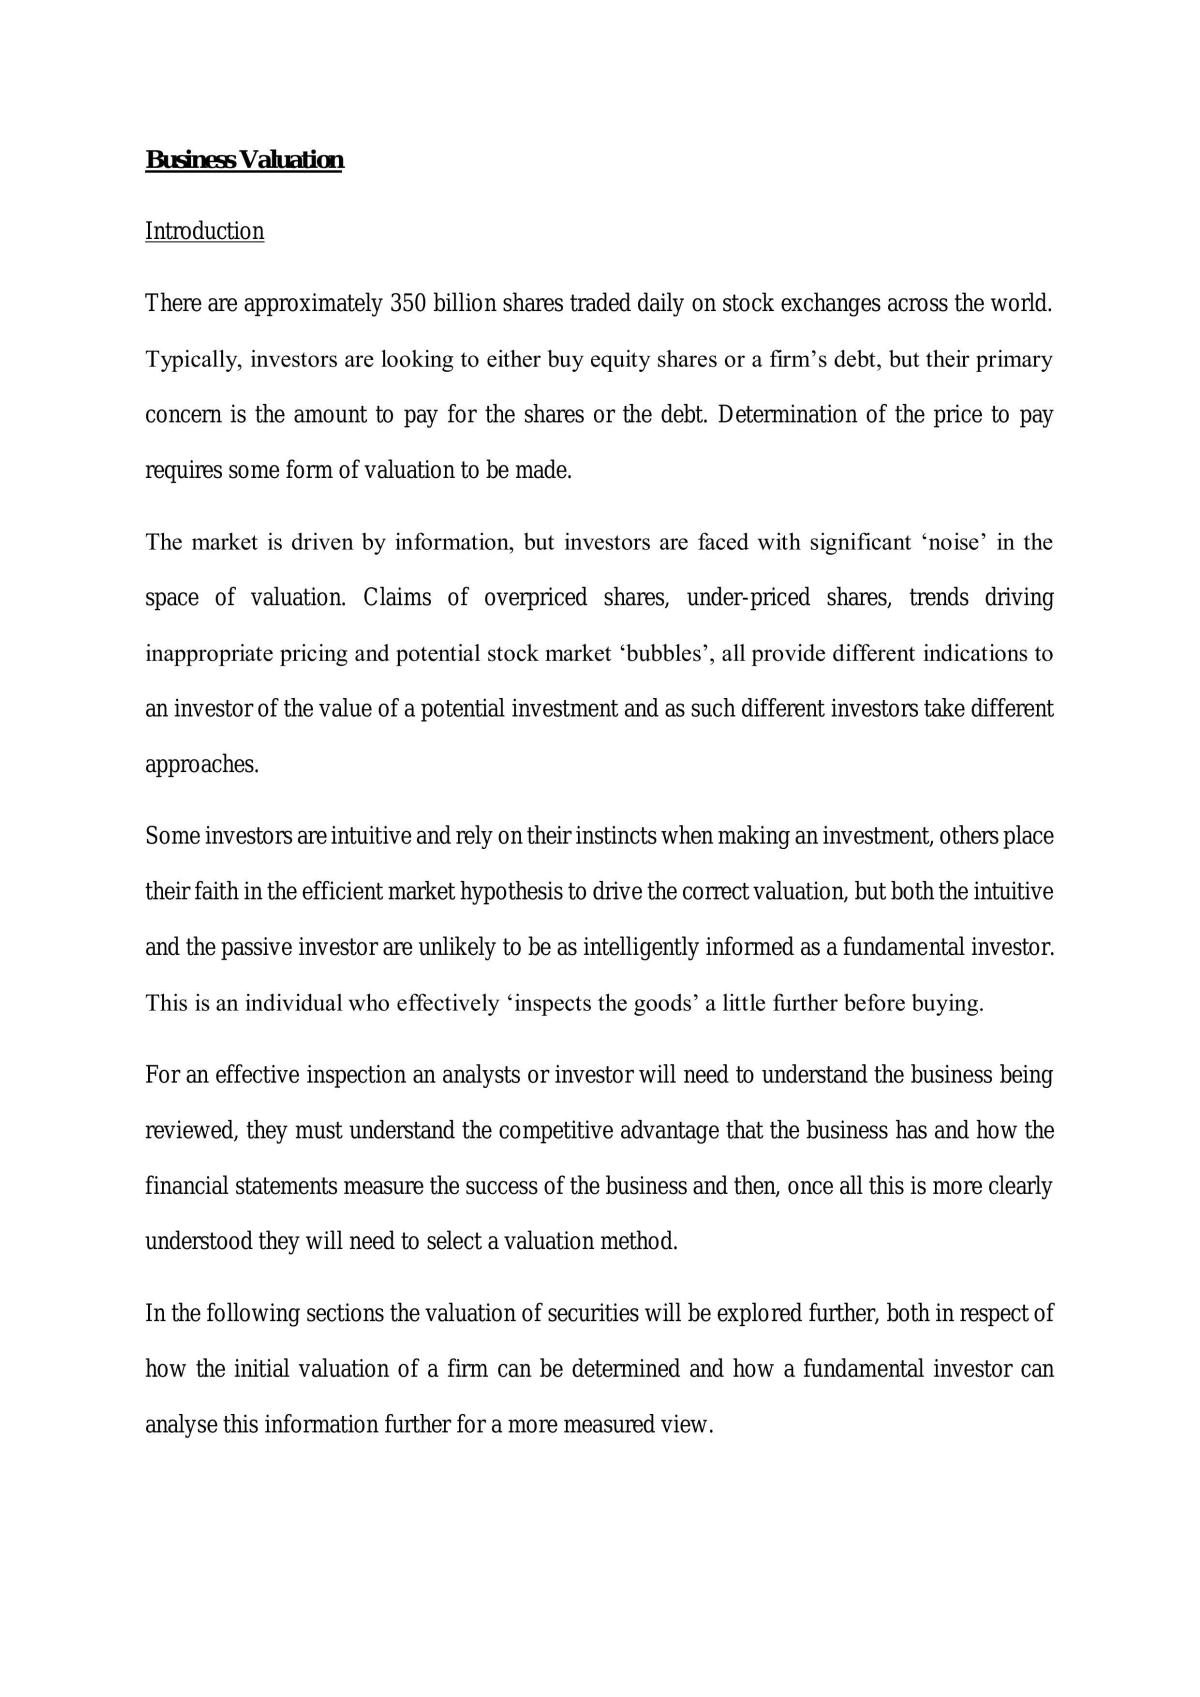 Business Valuation Essay  - Page 1